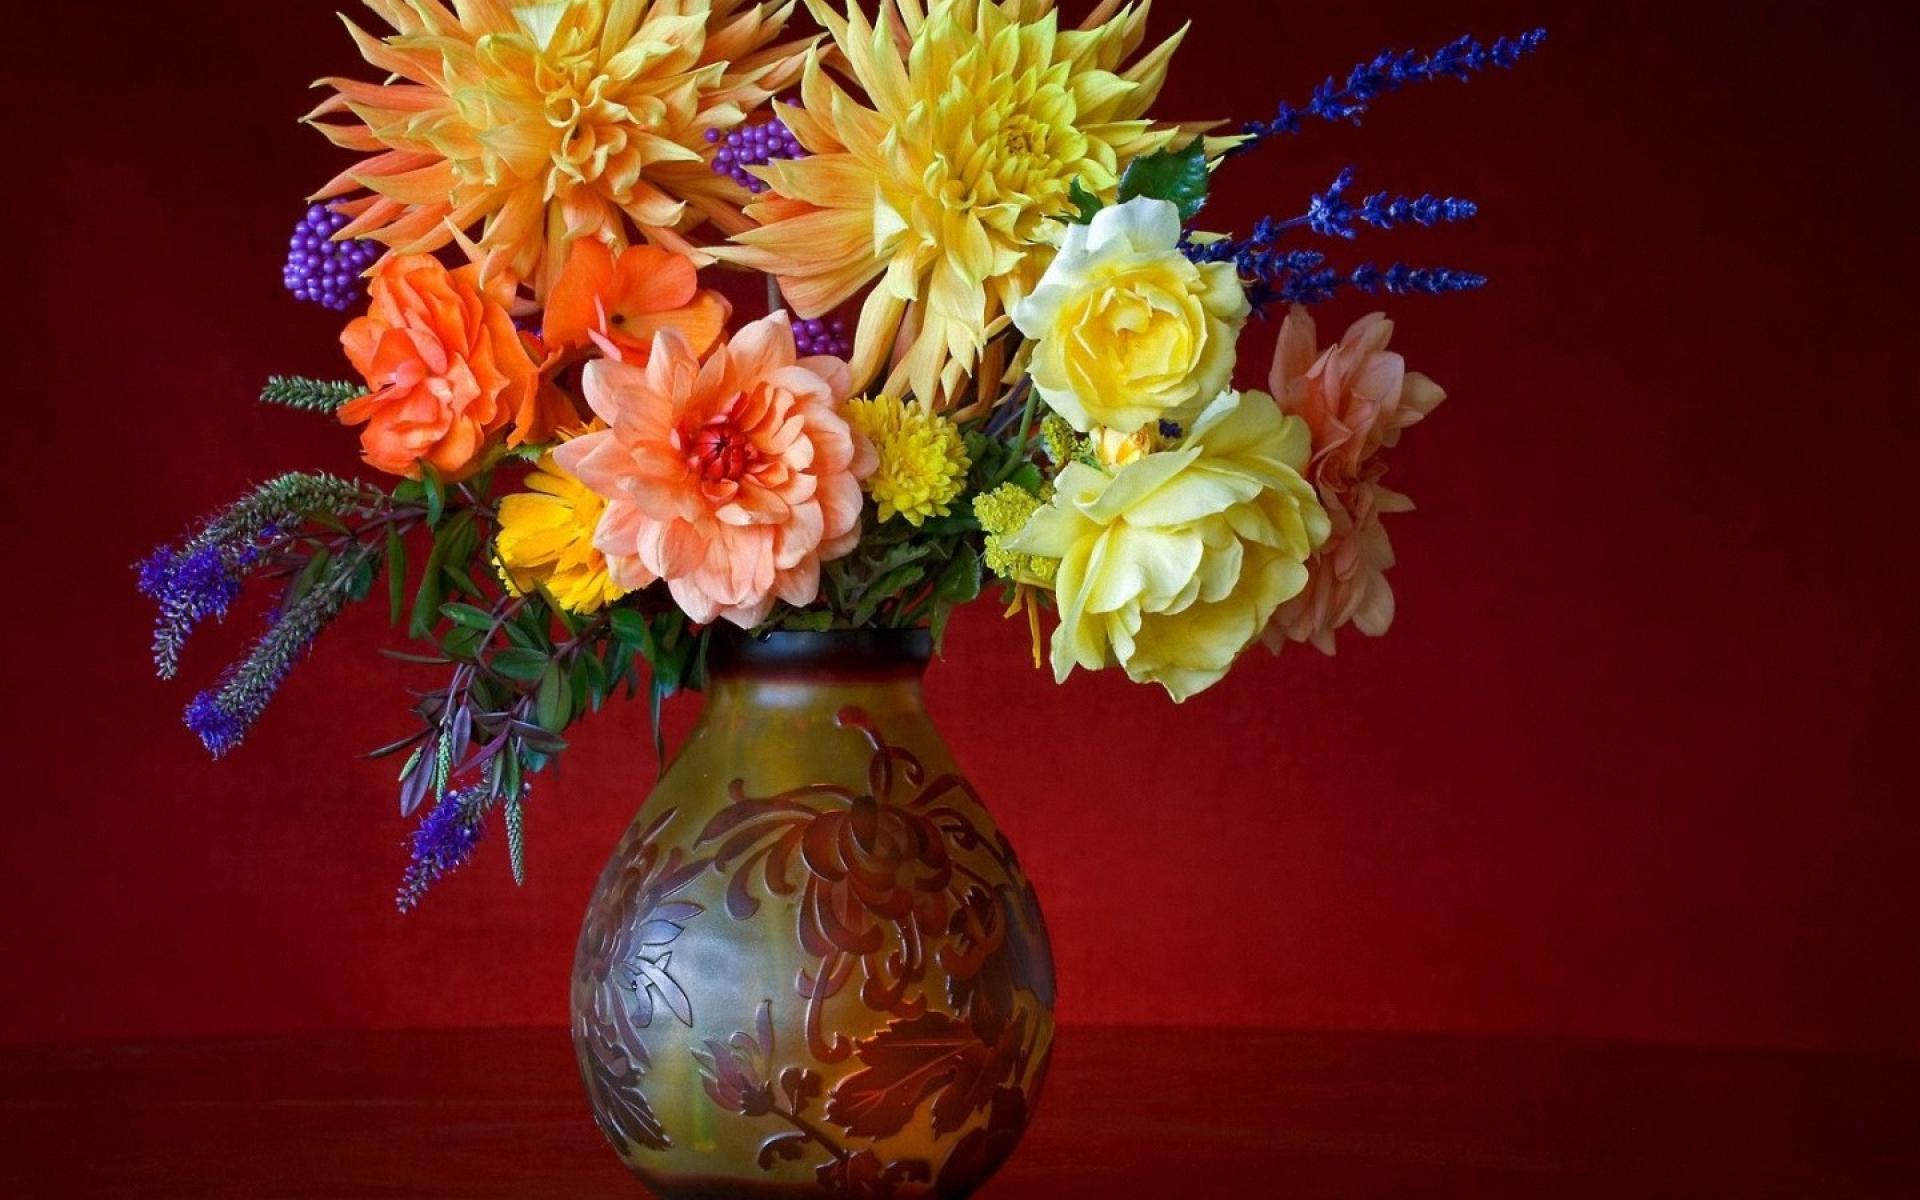 Rate Select Rating Give Vintage Vase Flowers